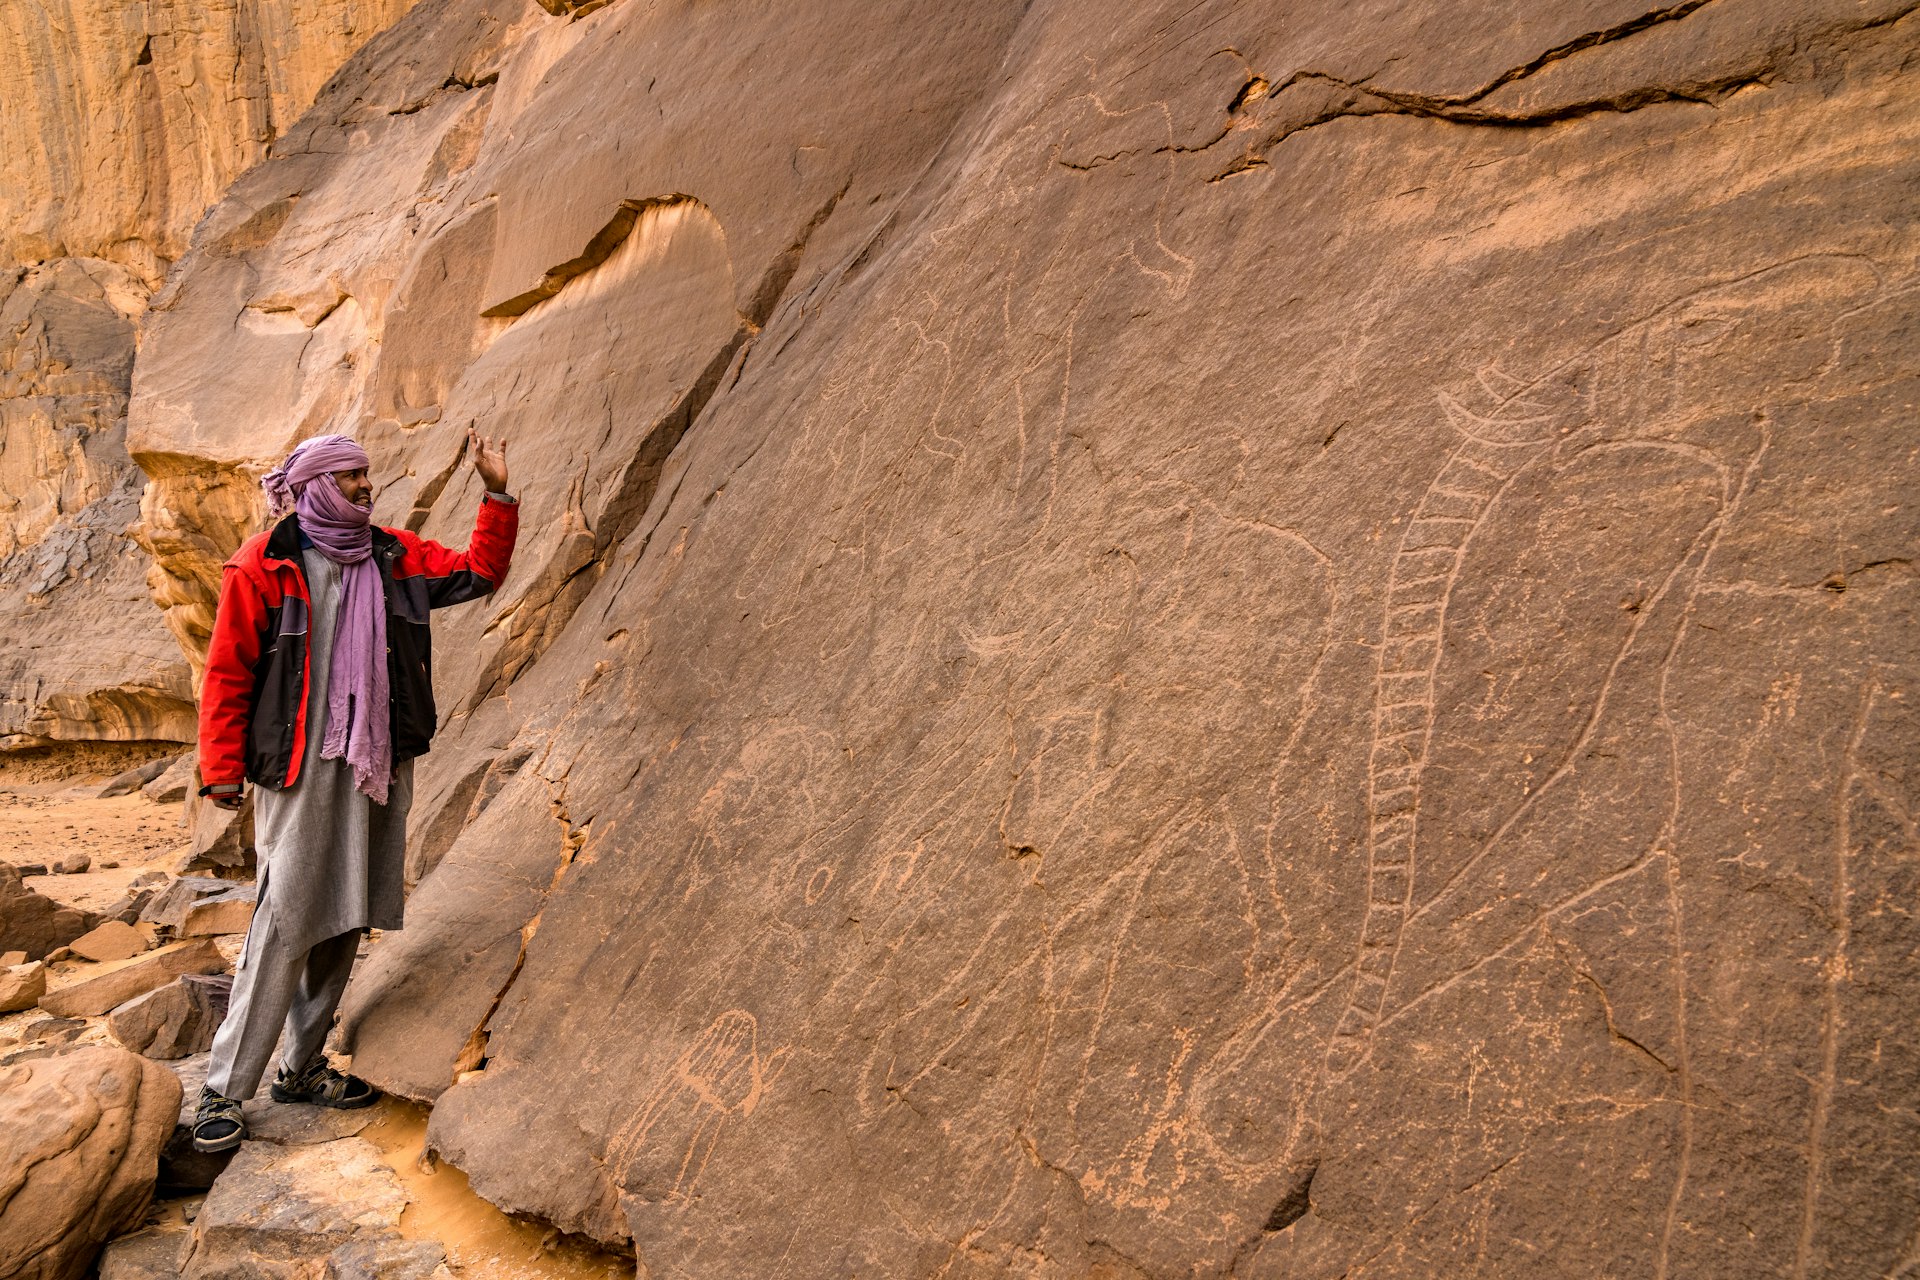 Guide, Abdessalam, showing rock carvings in Tassili National Park